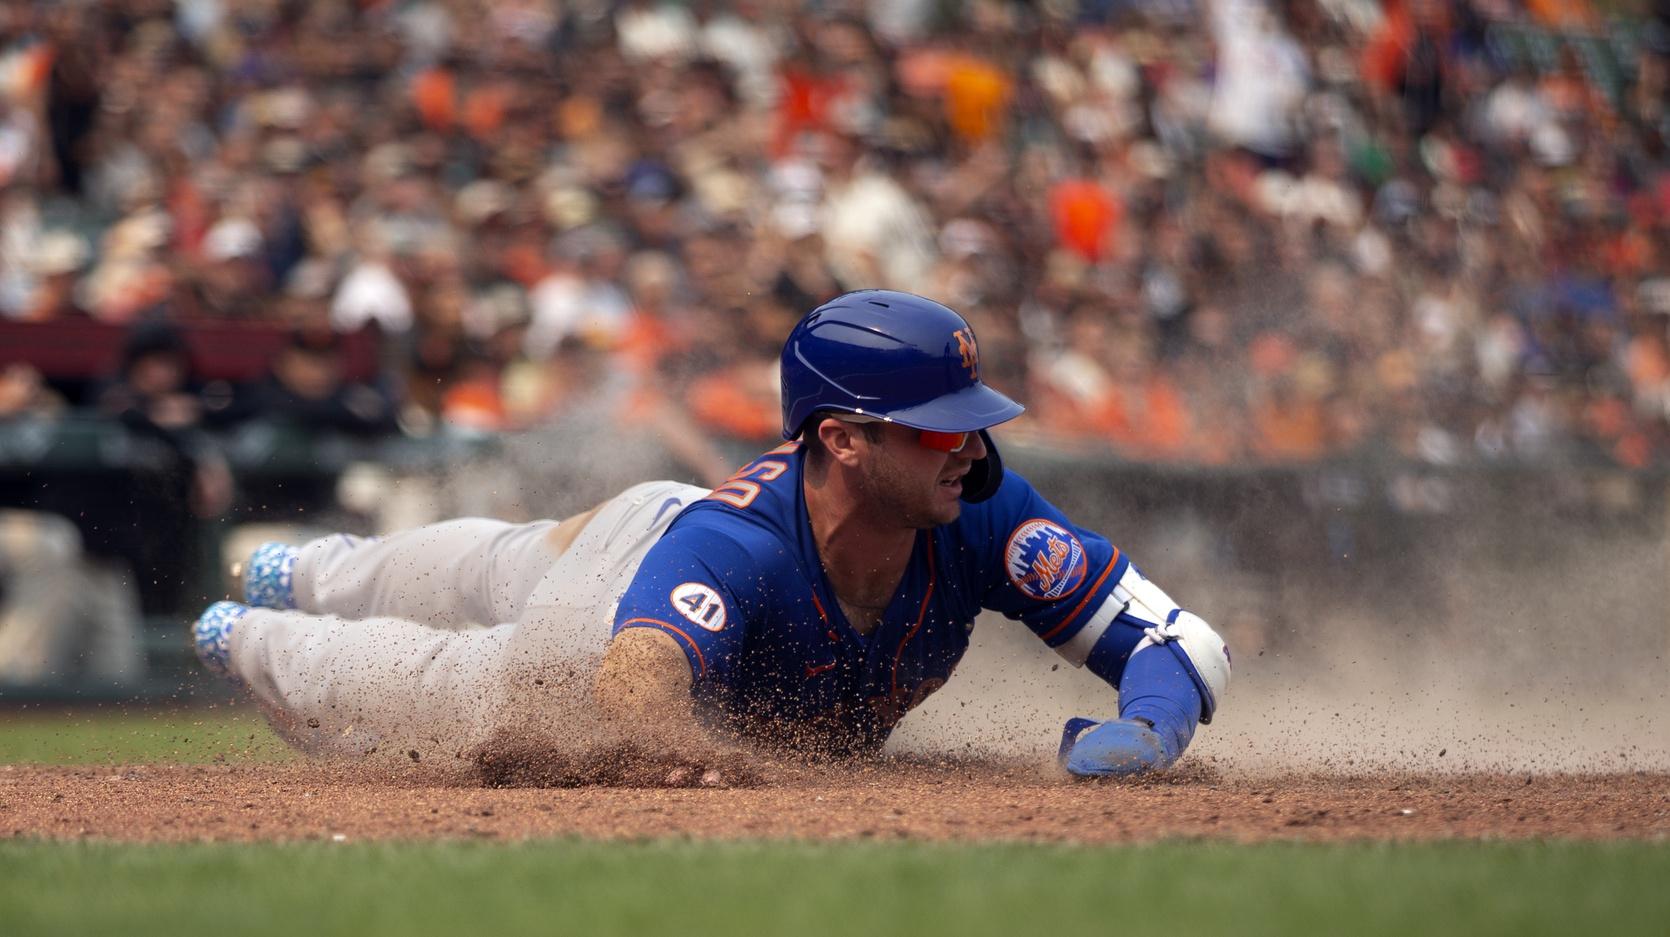 New York Mets first baseman Pete Alonso (20) slides safely home with the tying run on a sacrifice fly by third baseman J.D. Davis (28) during the ninth inning against the San Francisco Giants at Oracle Park. / D. Ross Cameron-USA TODAY Sports